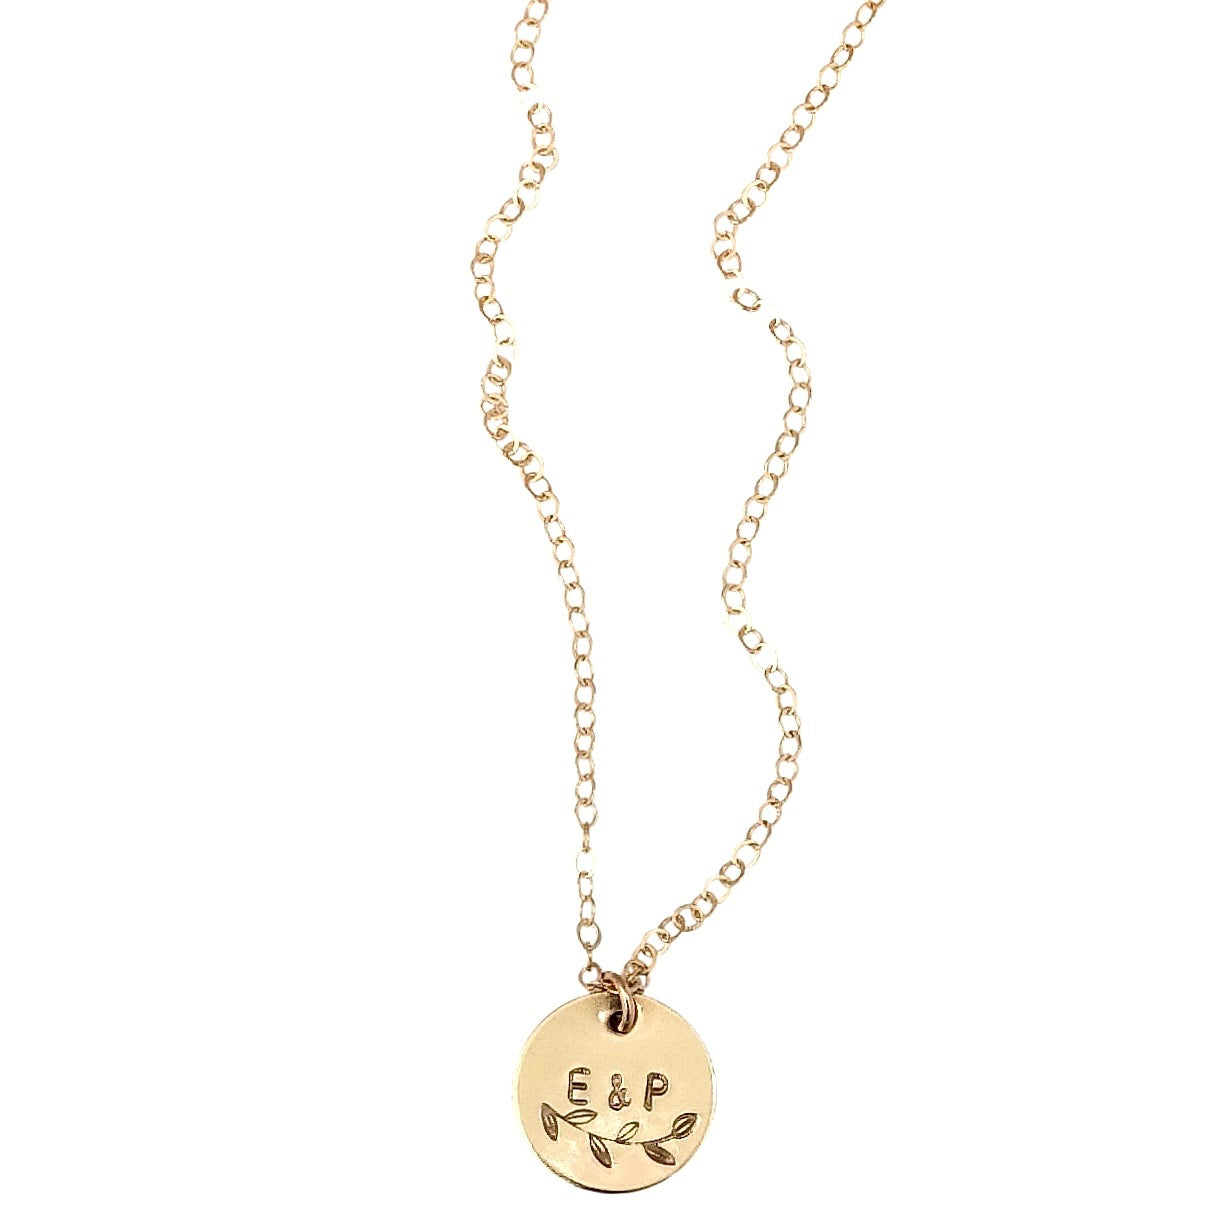 Personalised gold disc necklace with botanical design